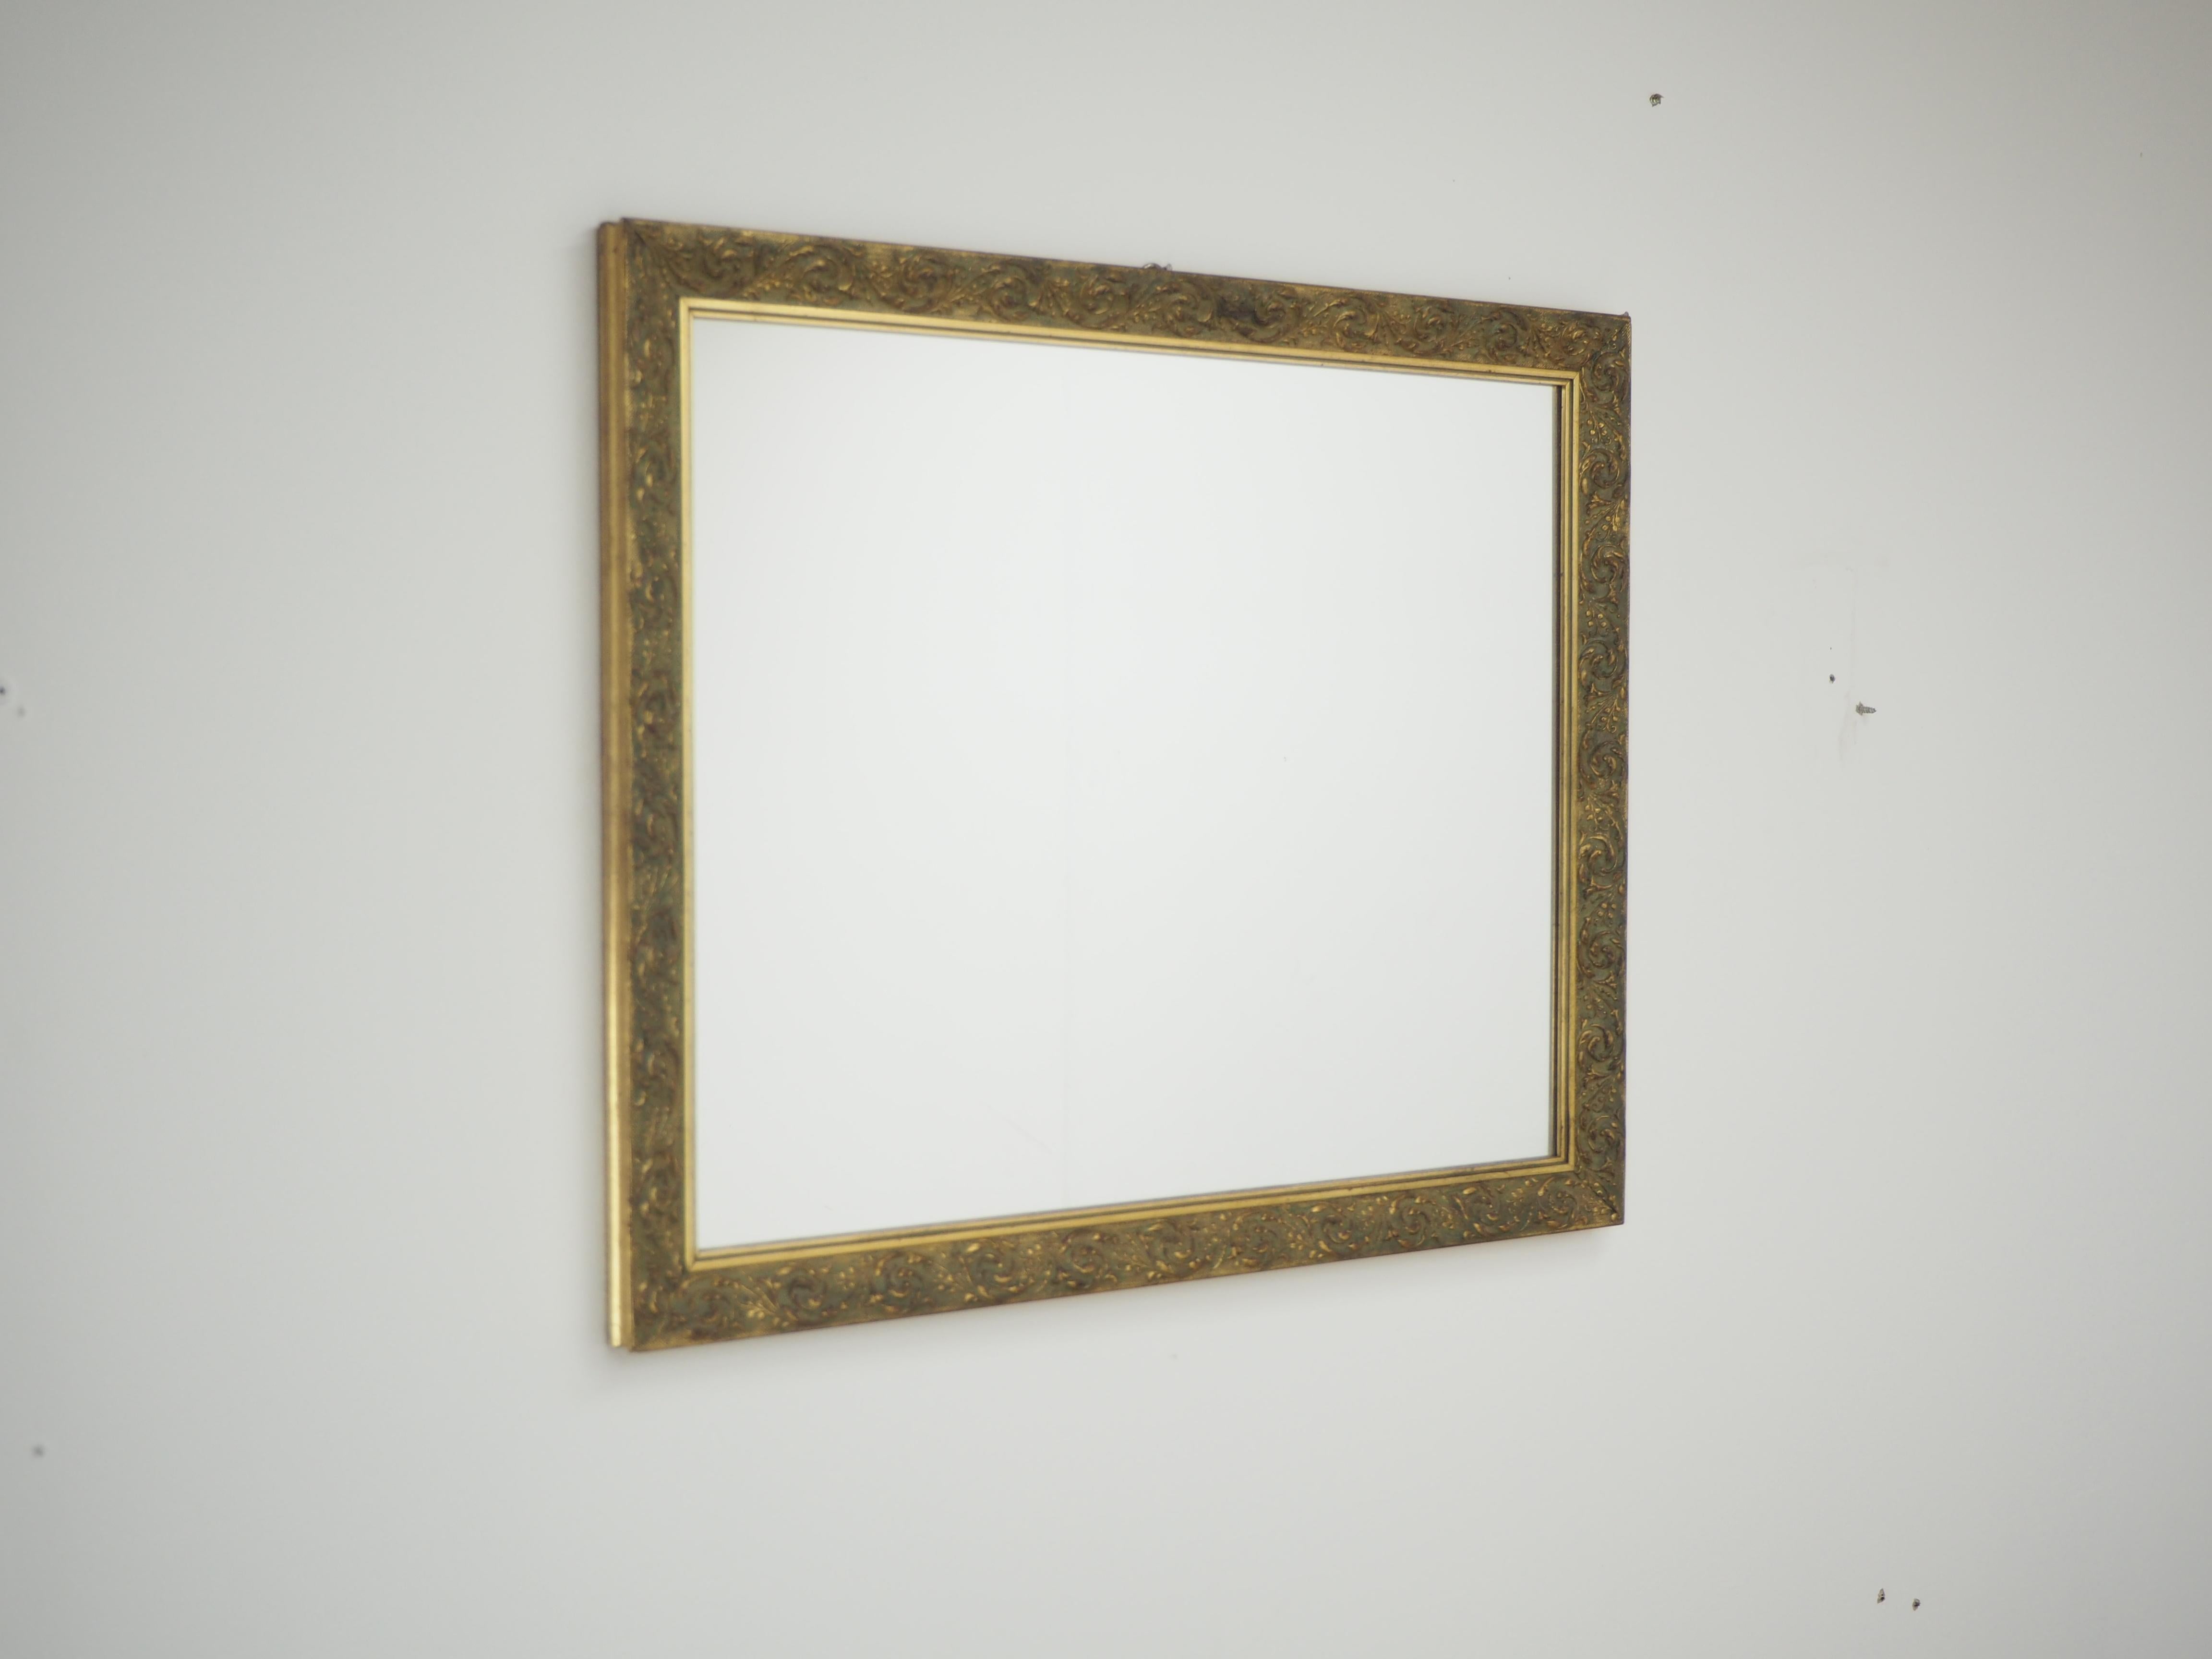 Wood frame
Handmade
Original condition
Mirror is the new.